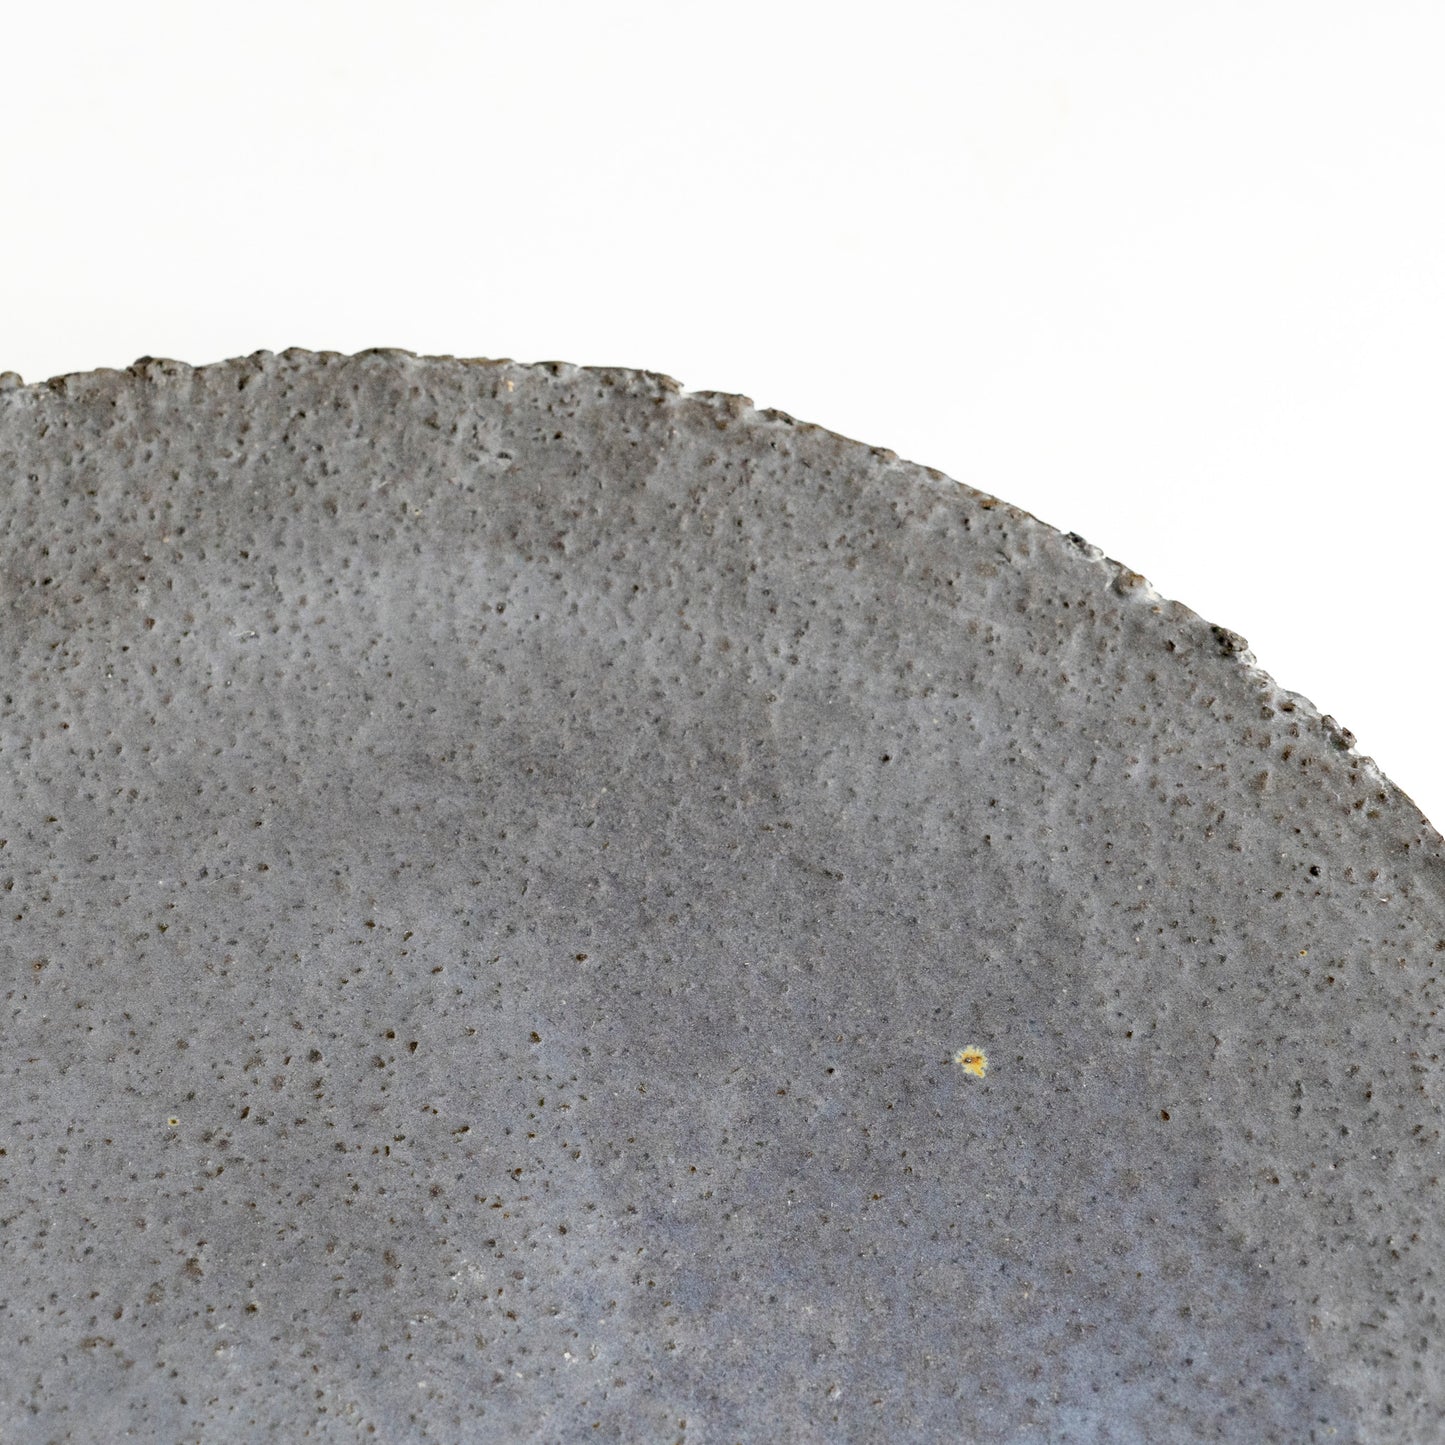 Large, textured plate